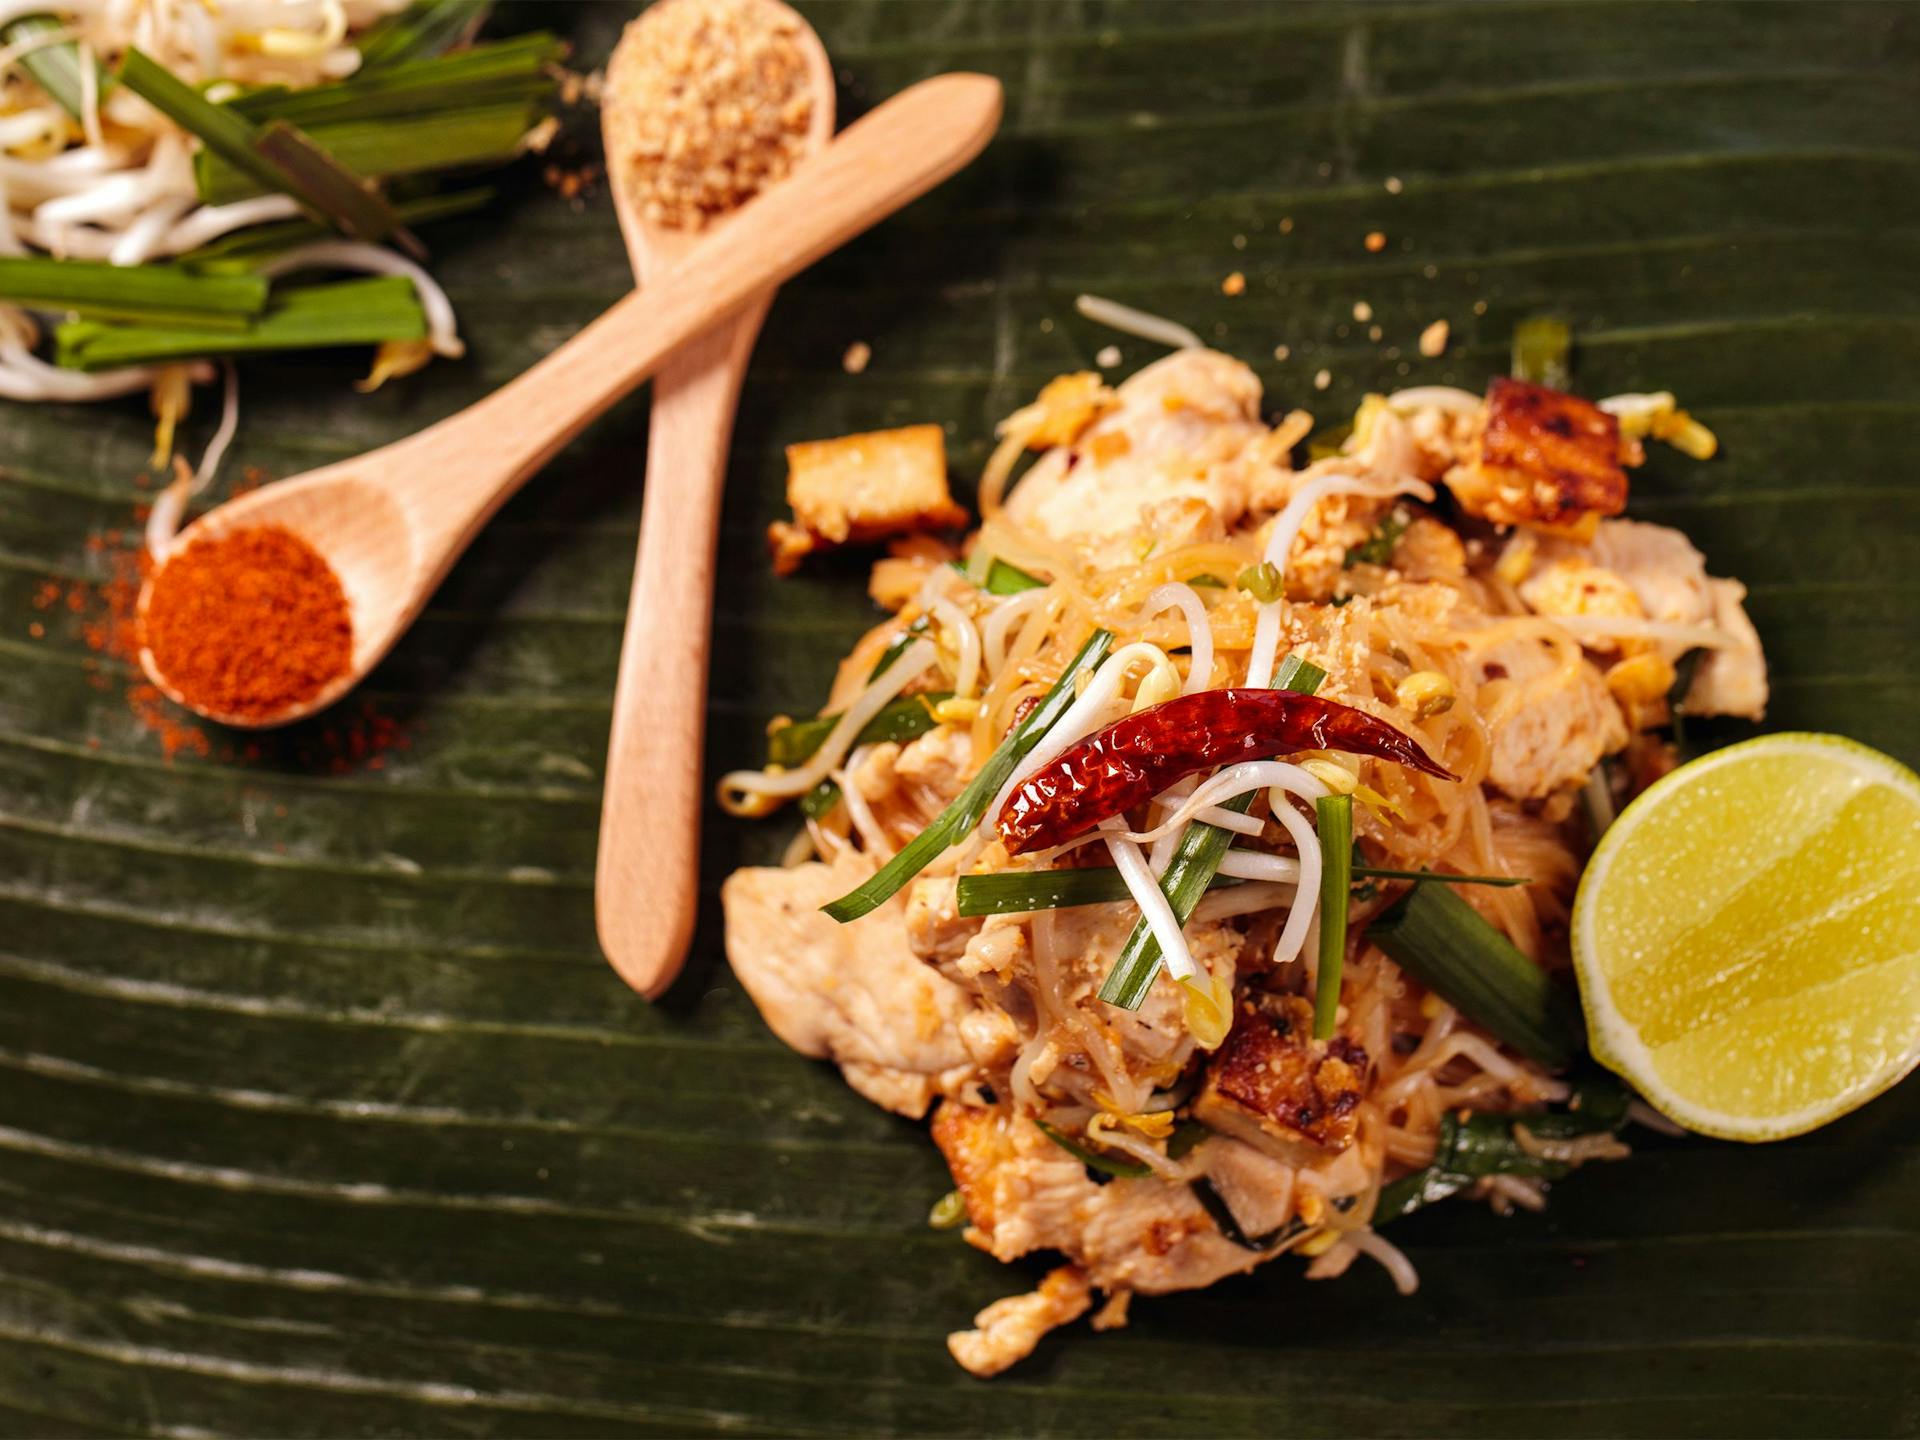 Pad Thai on a banana leaf, with spices in spoons and a lime wedge